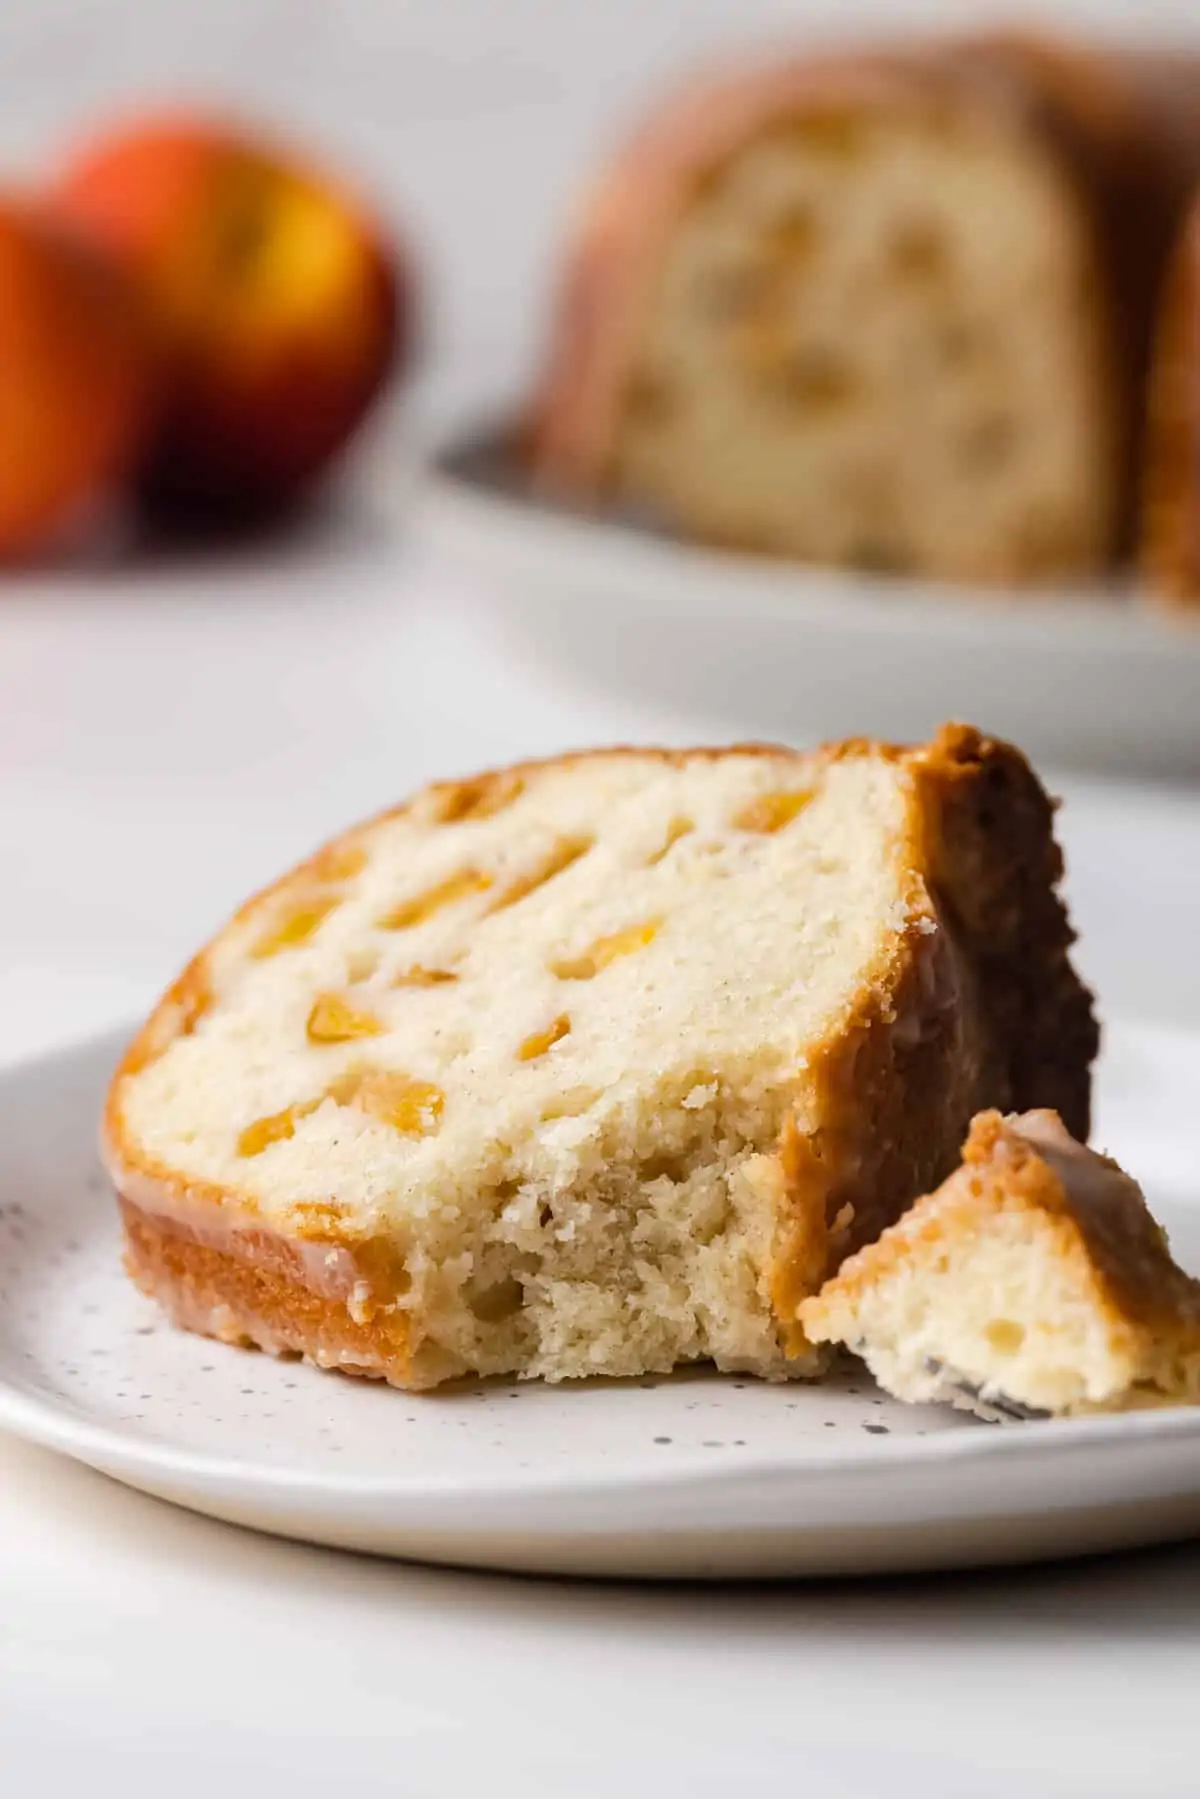 A slice of peach pound cake on a plate with a bite cut off